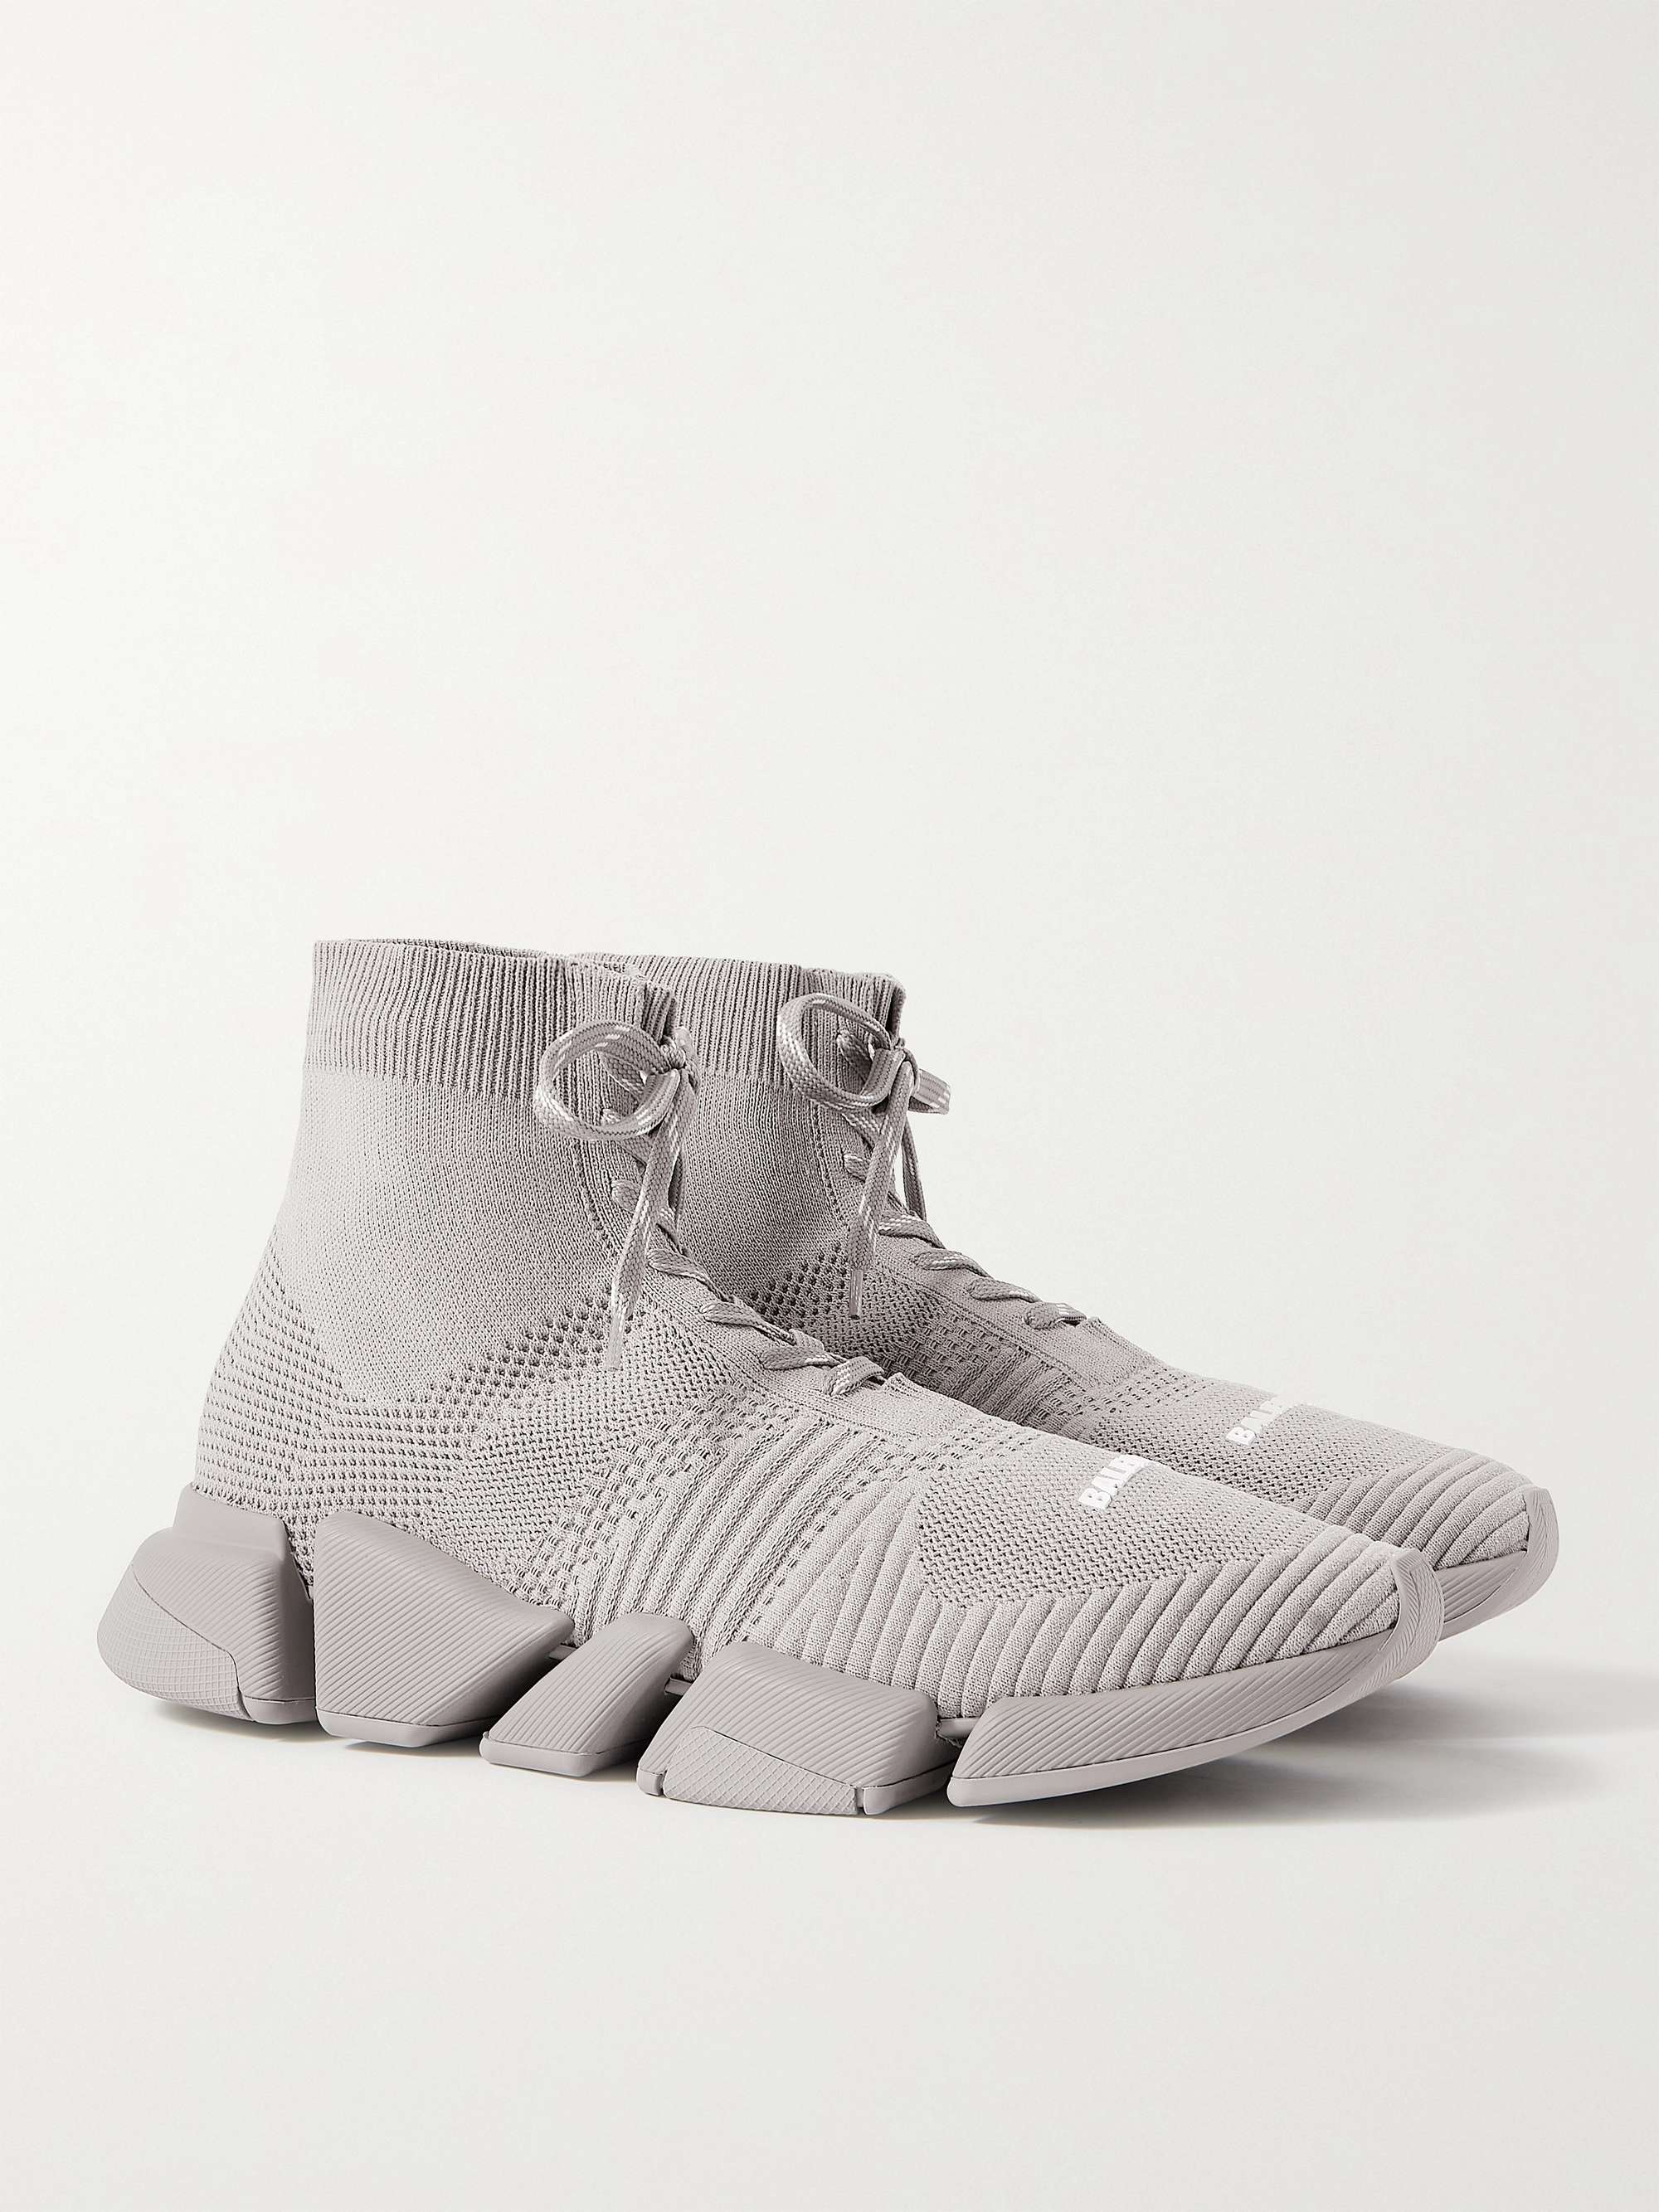 BALENCIAGA Speed 2.0 Stretch-Knit Sneakers for Men | MR PORTER